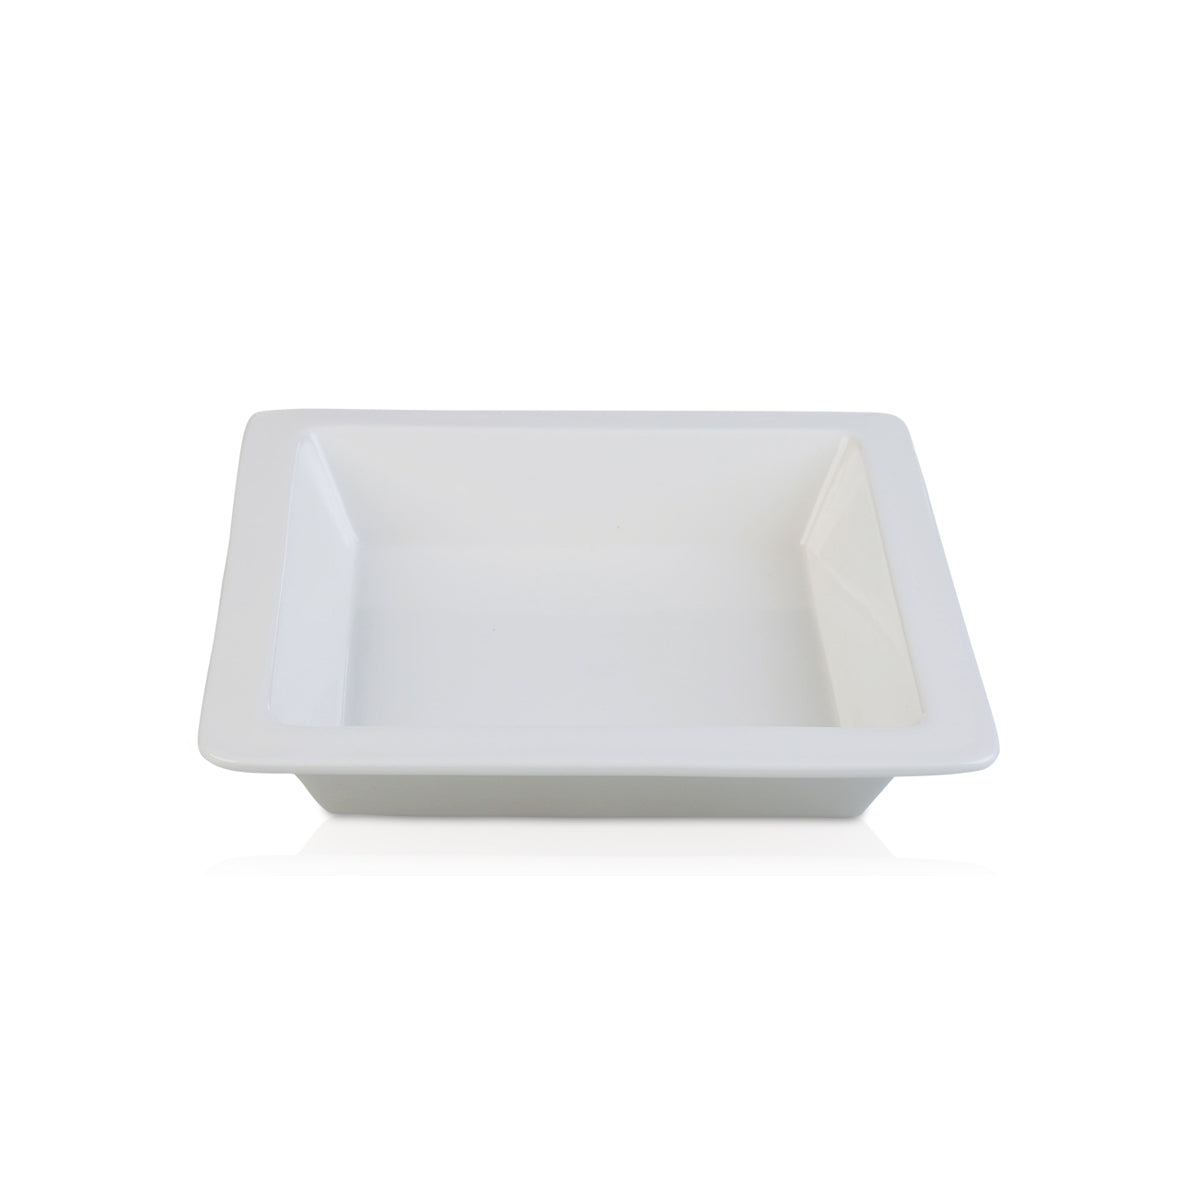 Deep dish plates - available in porcelain and melamine materials. Porcelains displays refinements and retains heat well while melamines are lightweight for easy handling.